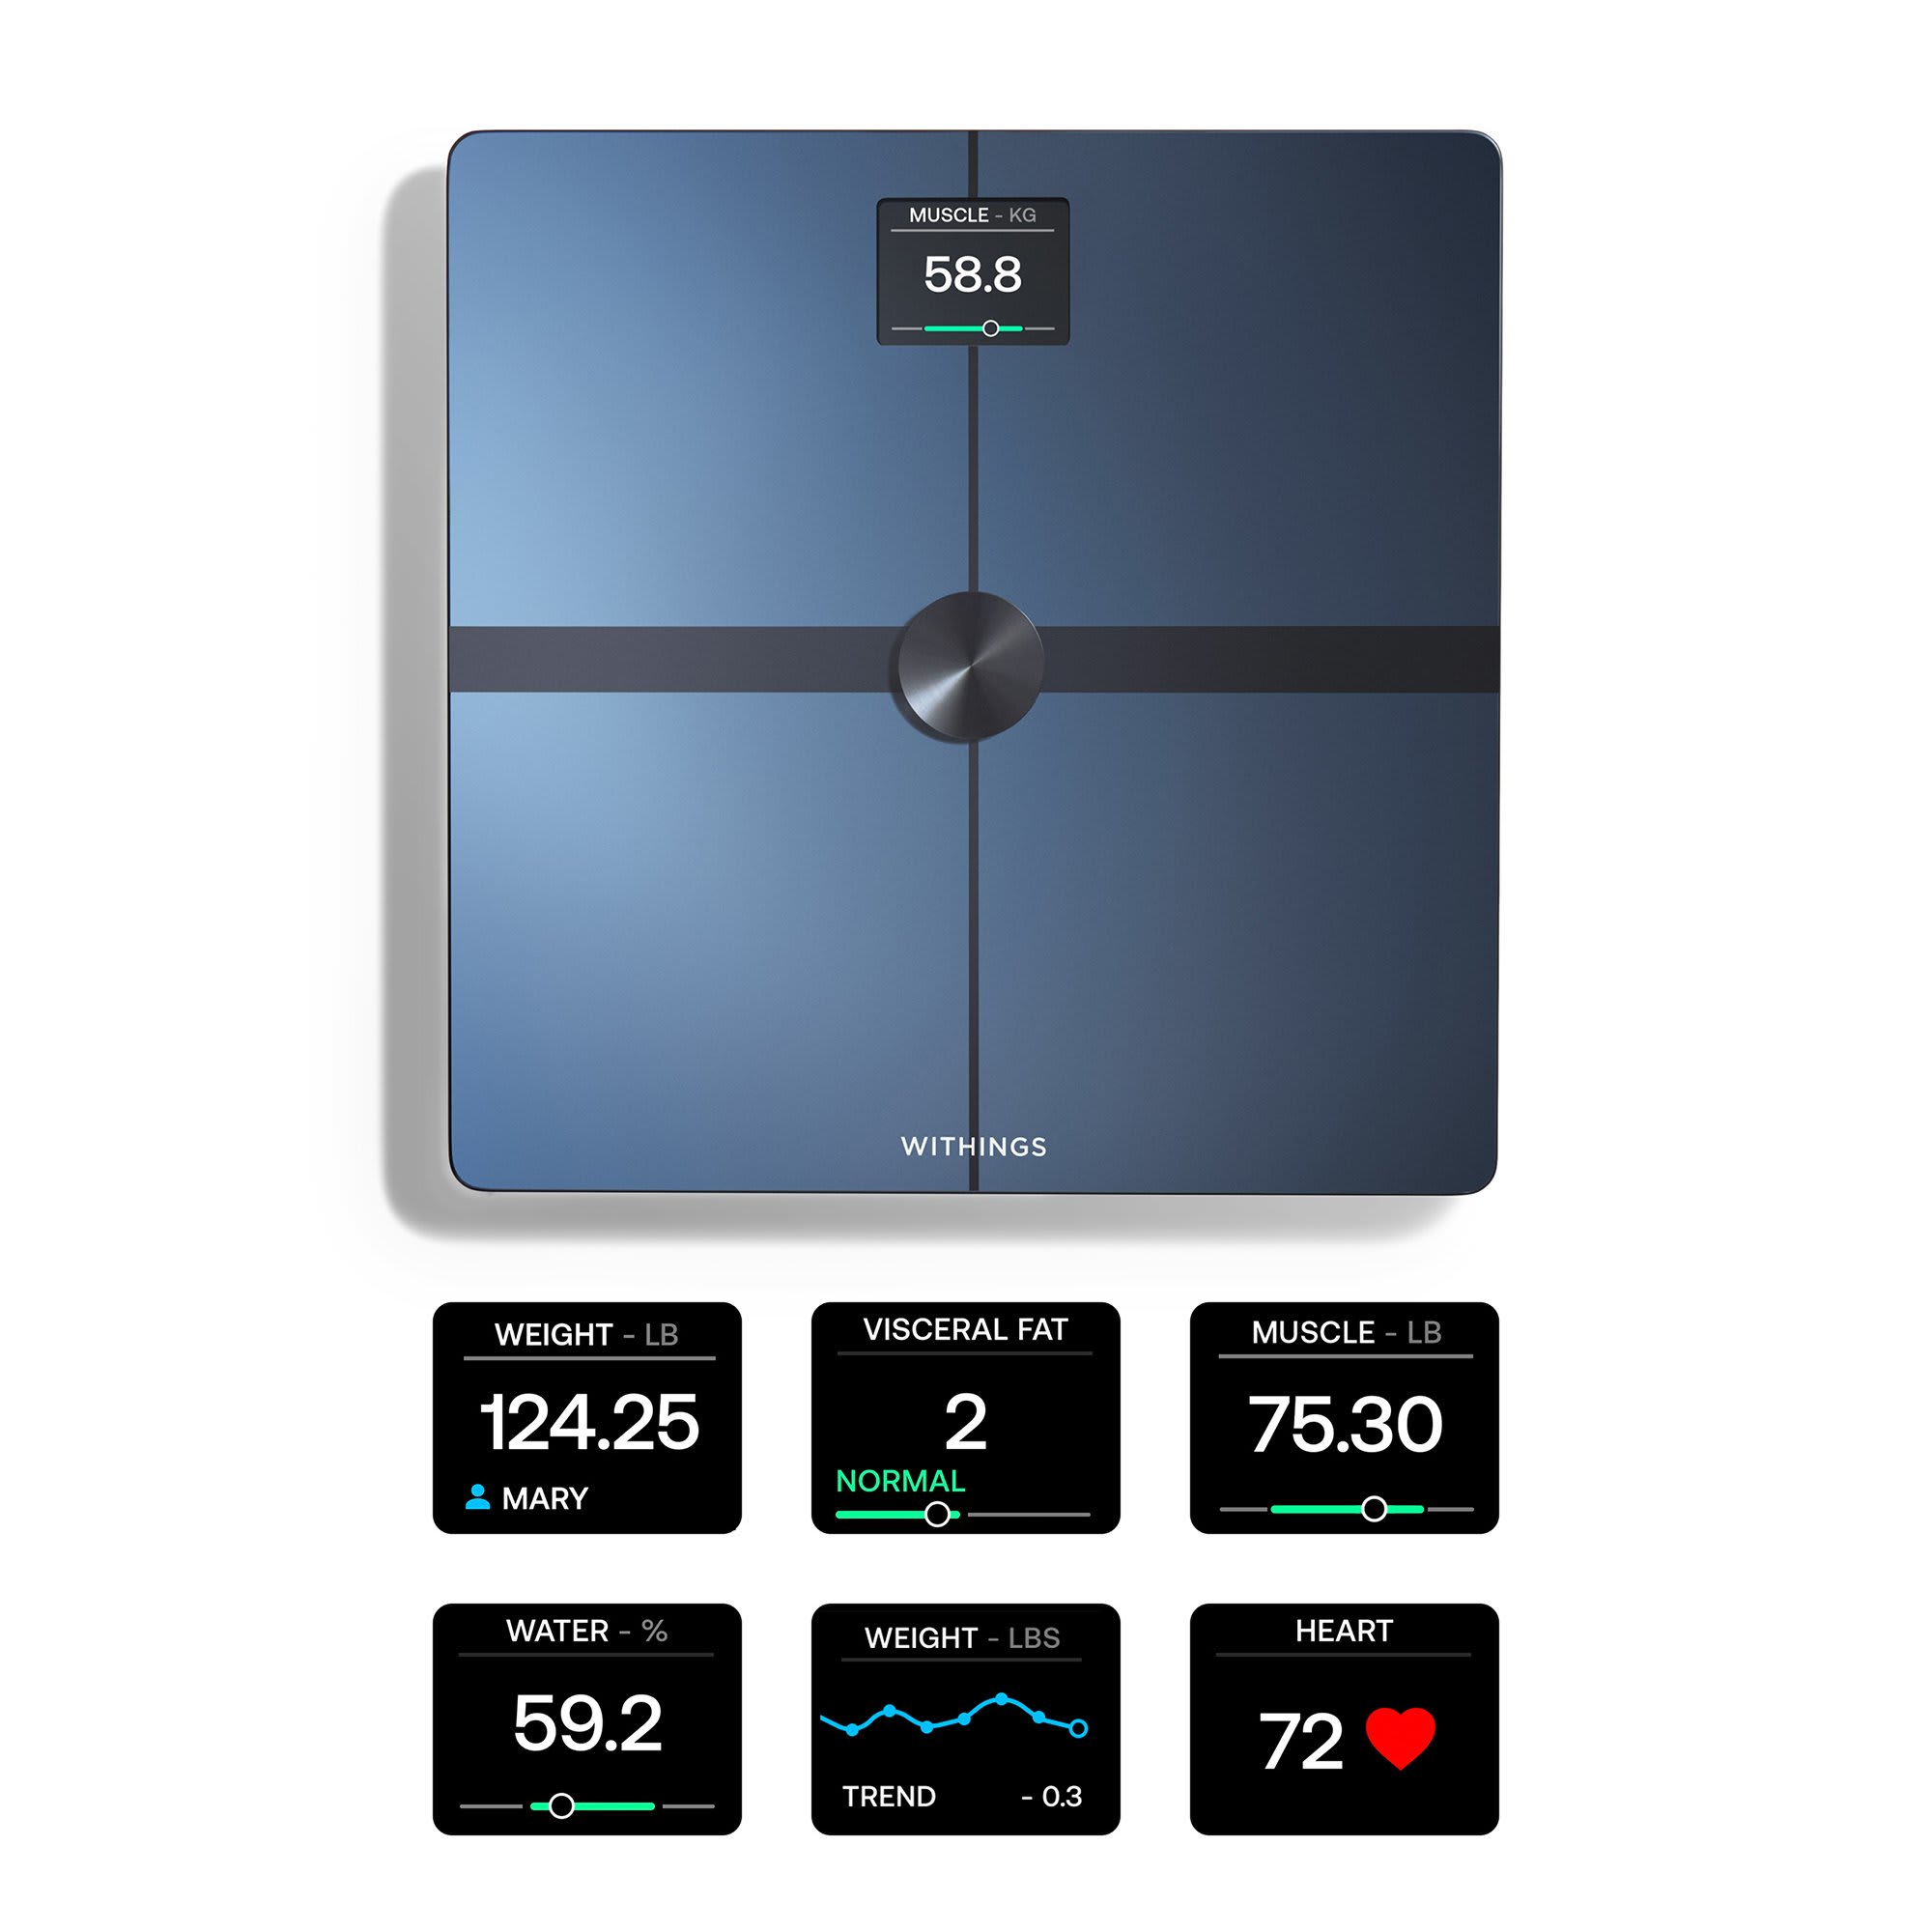 Withings Body Smart Advanced Body Composition Smart Wi-Fi Scale